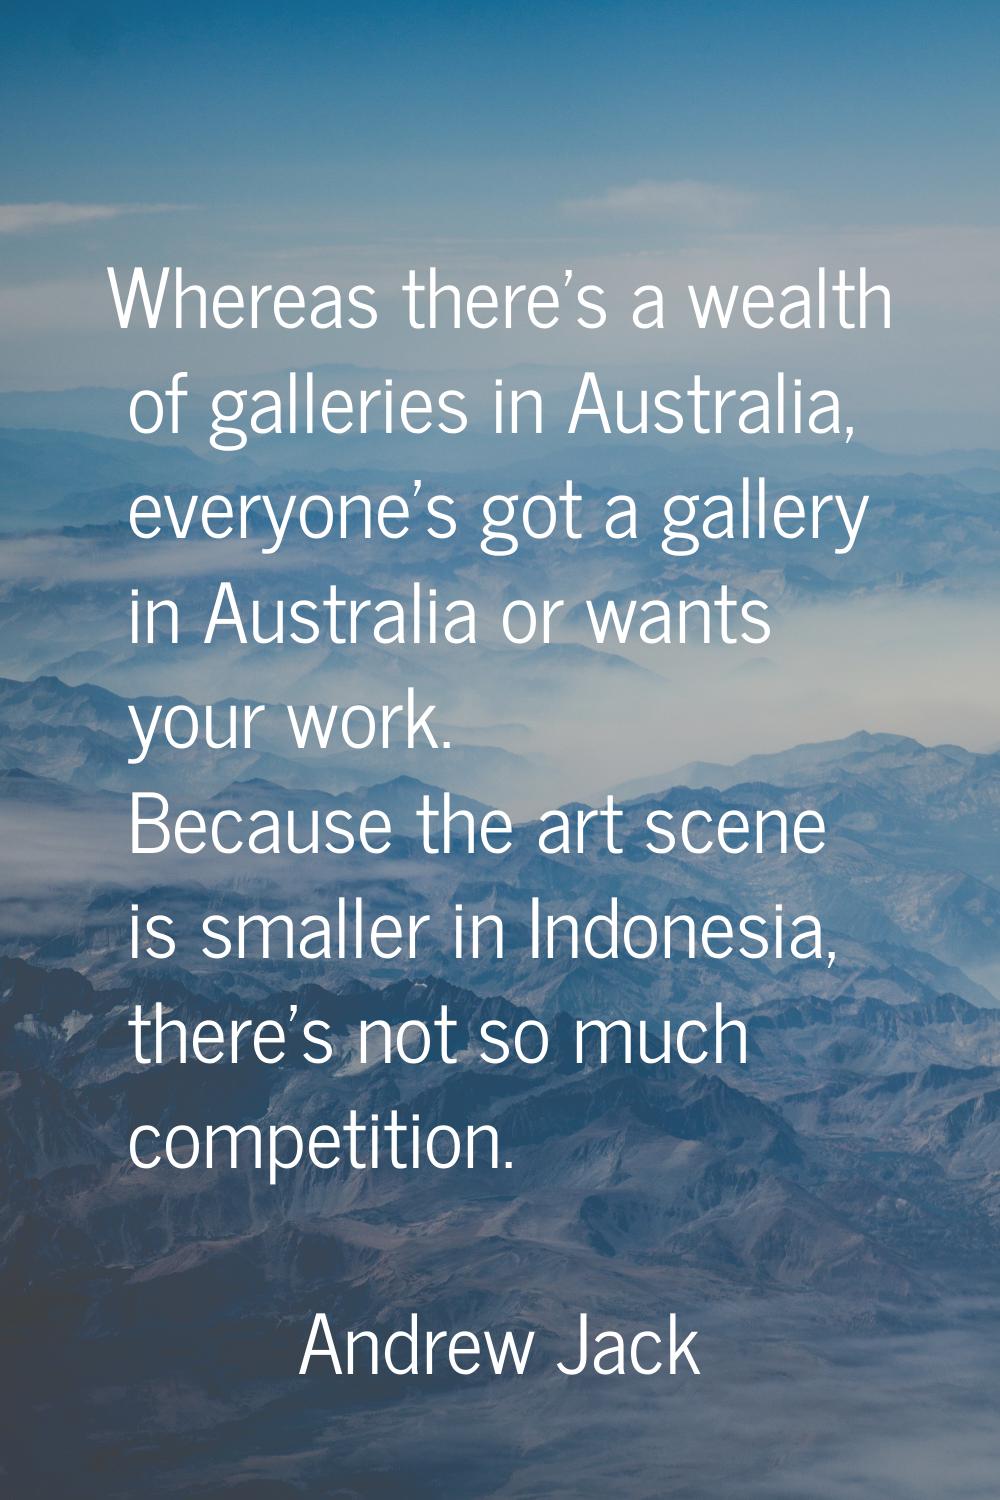 Whereas there's a wealth of galleries in Australia, everyone's got a gallery in Australia or wants 